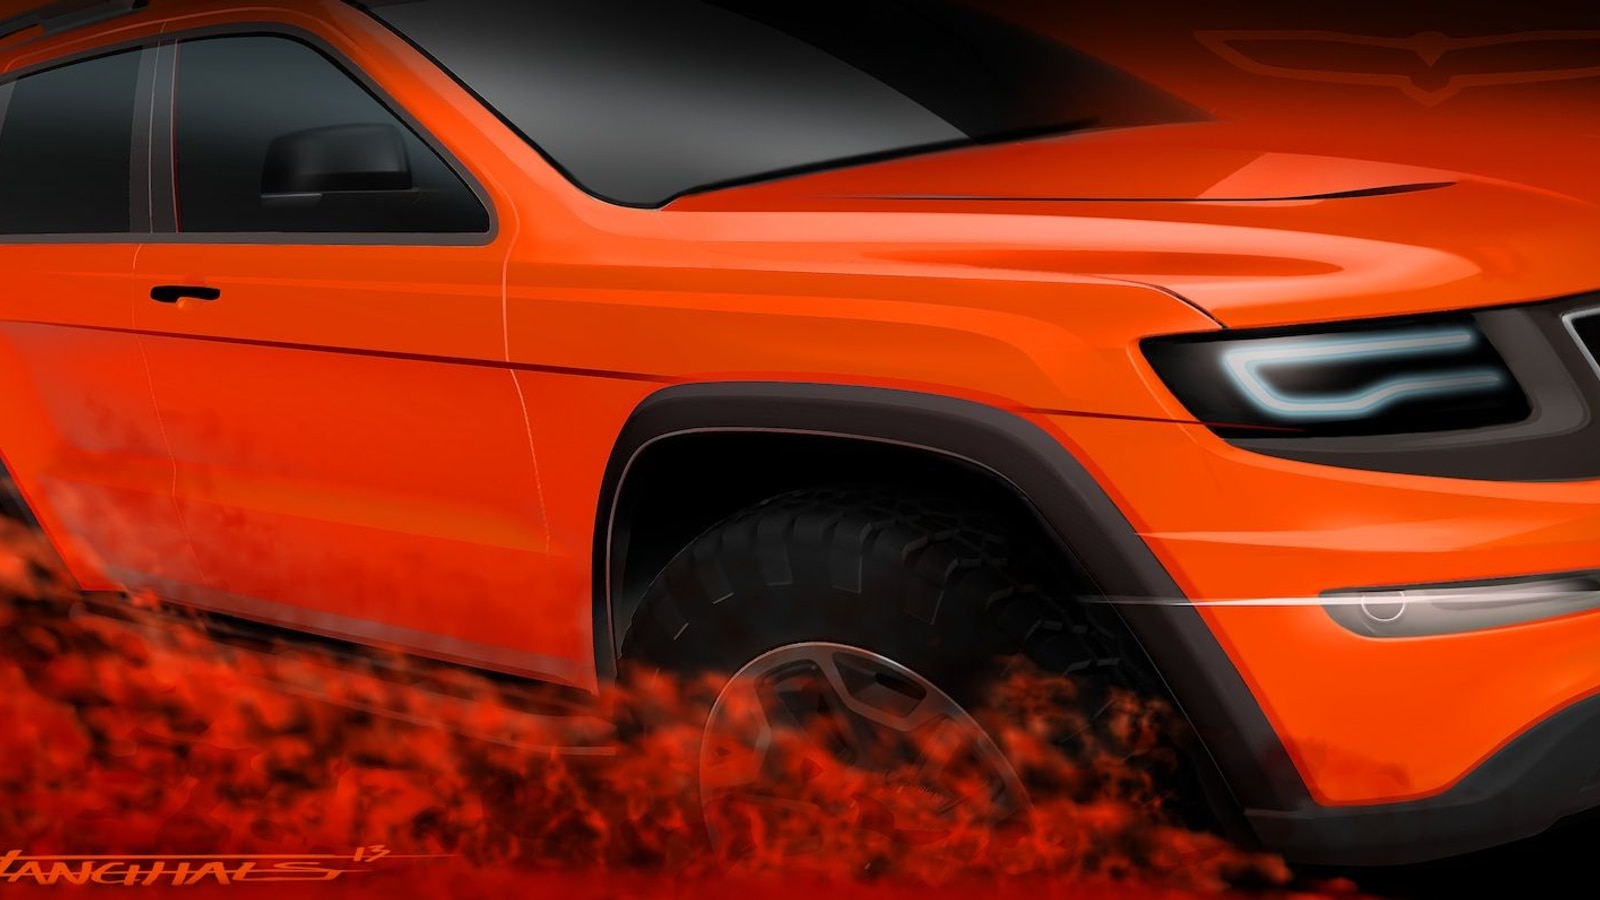 Jeep's Trailhawk II concept - image: Chrysler Group LLC